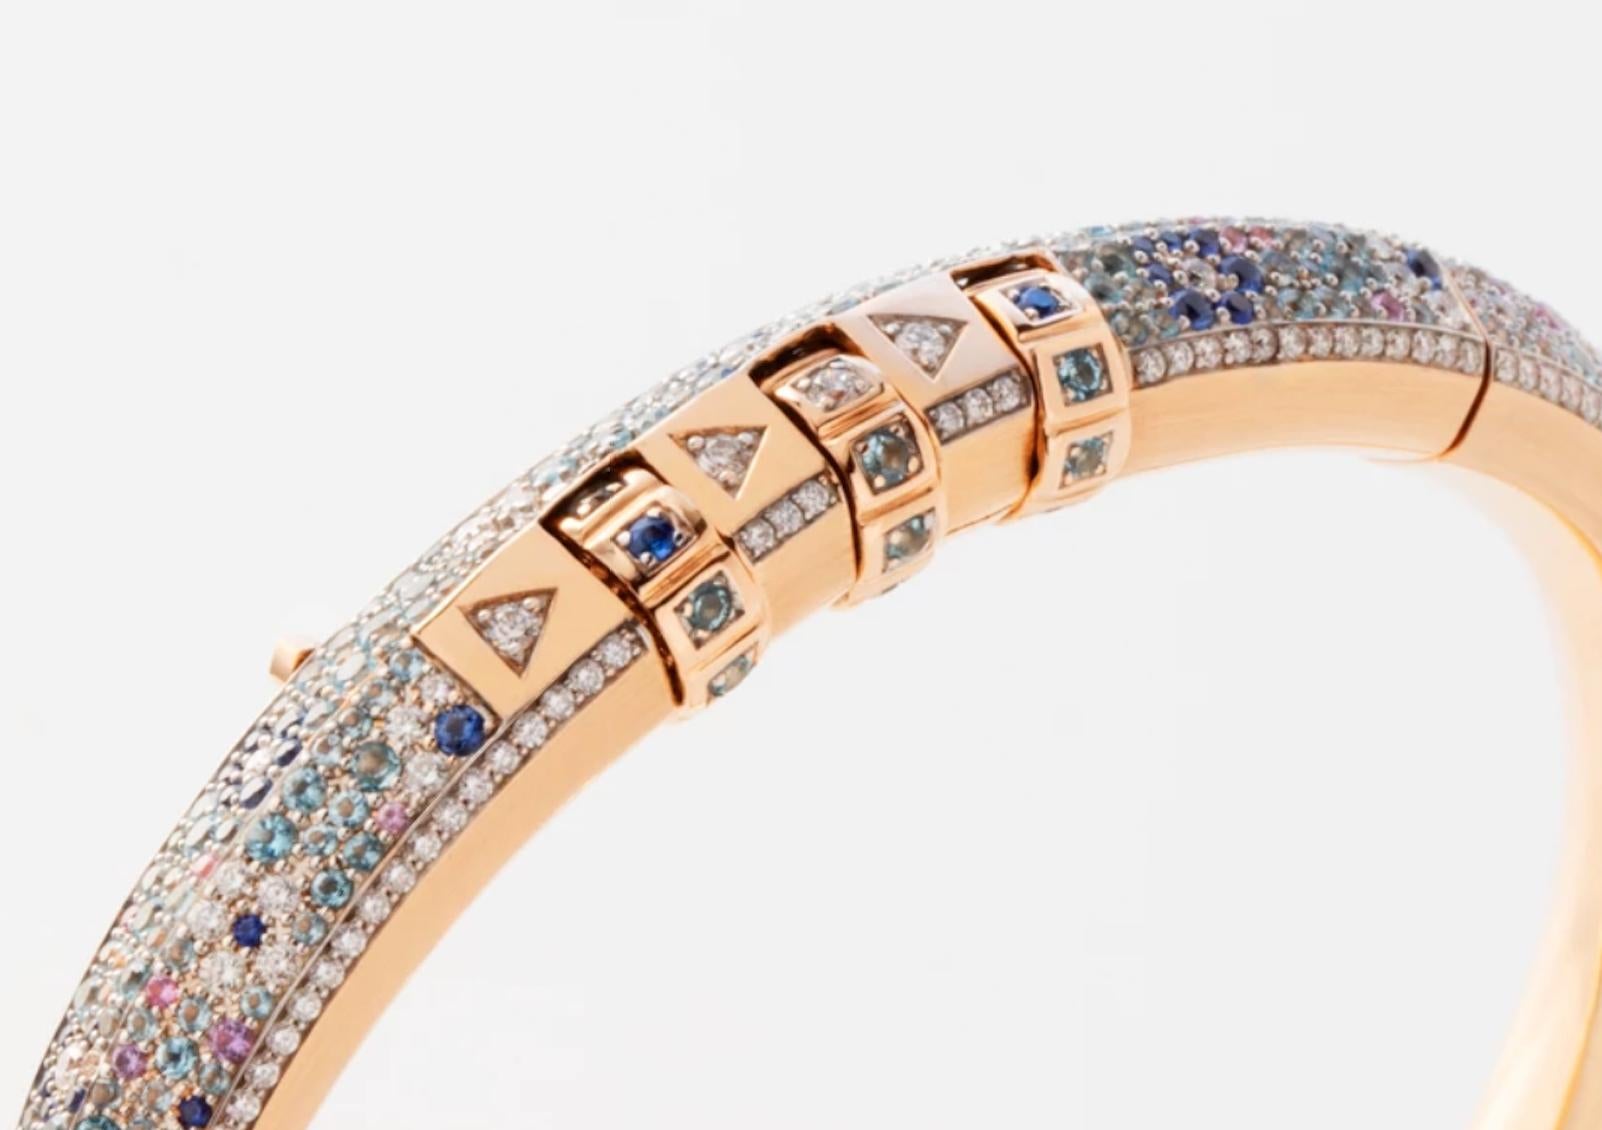 18 Karat Flower Code Minor Bracelet features a solid 18k Rose Gold bracelet with pave White Diamonds, Blue Sapphires, Pink Sapphires, Purple Amethyst, and Aquamarine that make up a flower pattern, with a custom code that opens and locks the bracelet